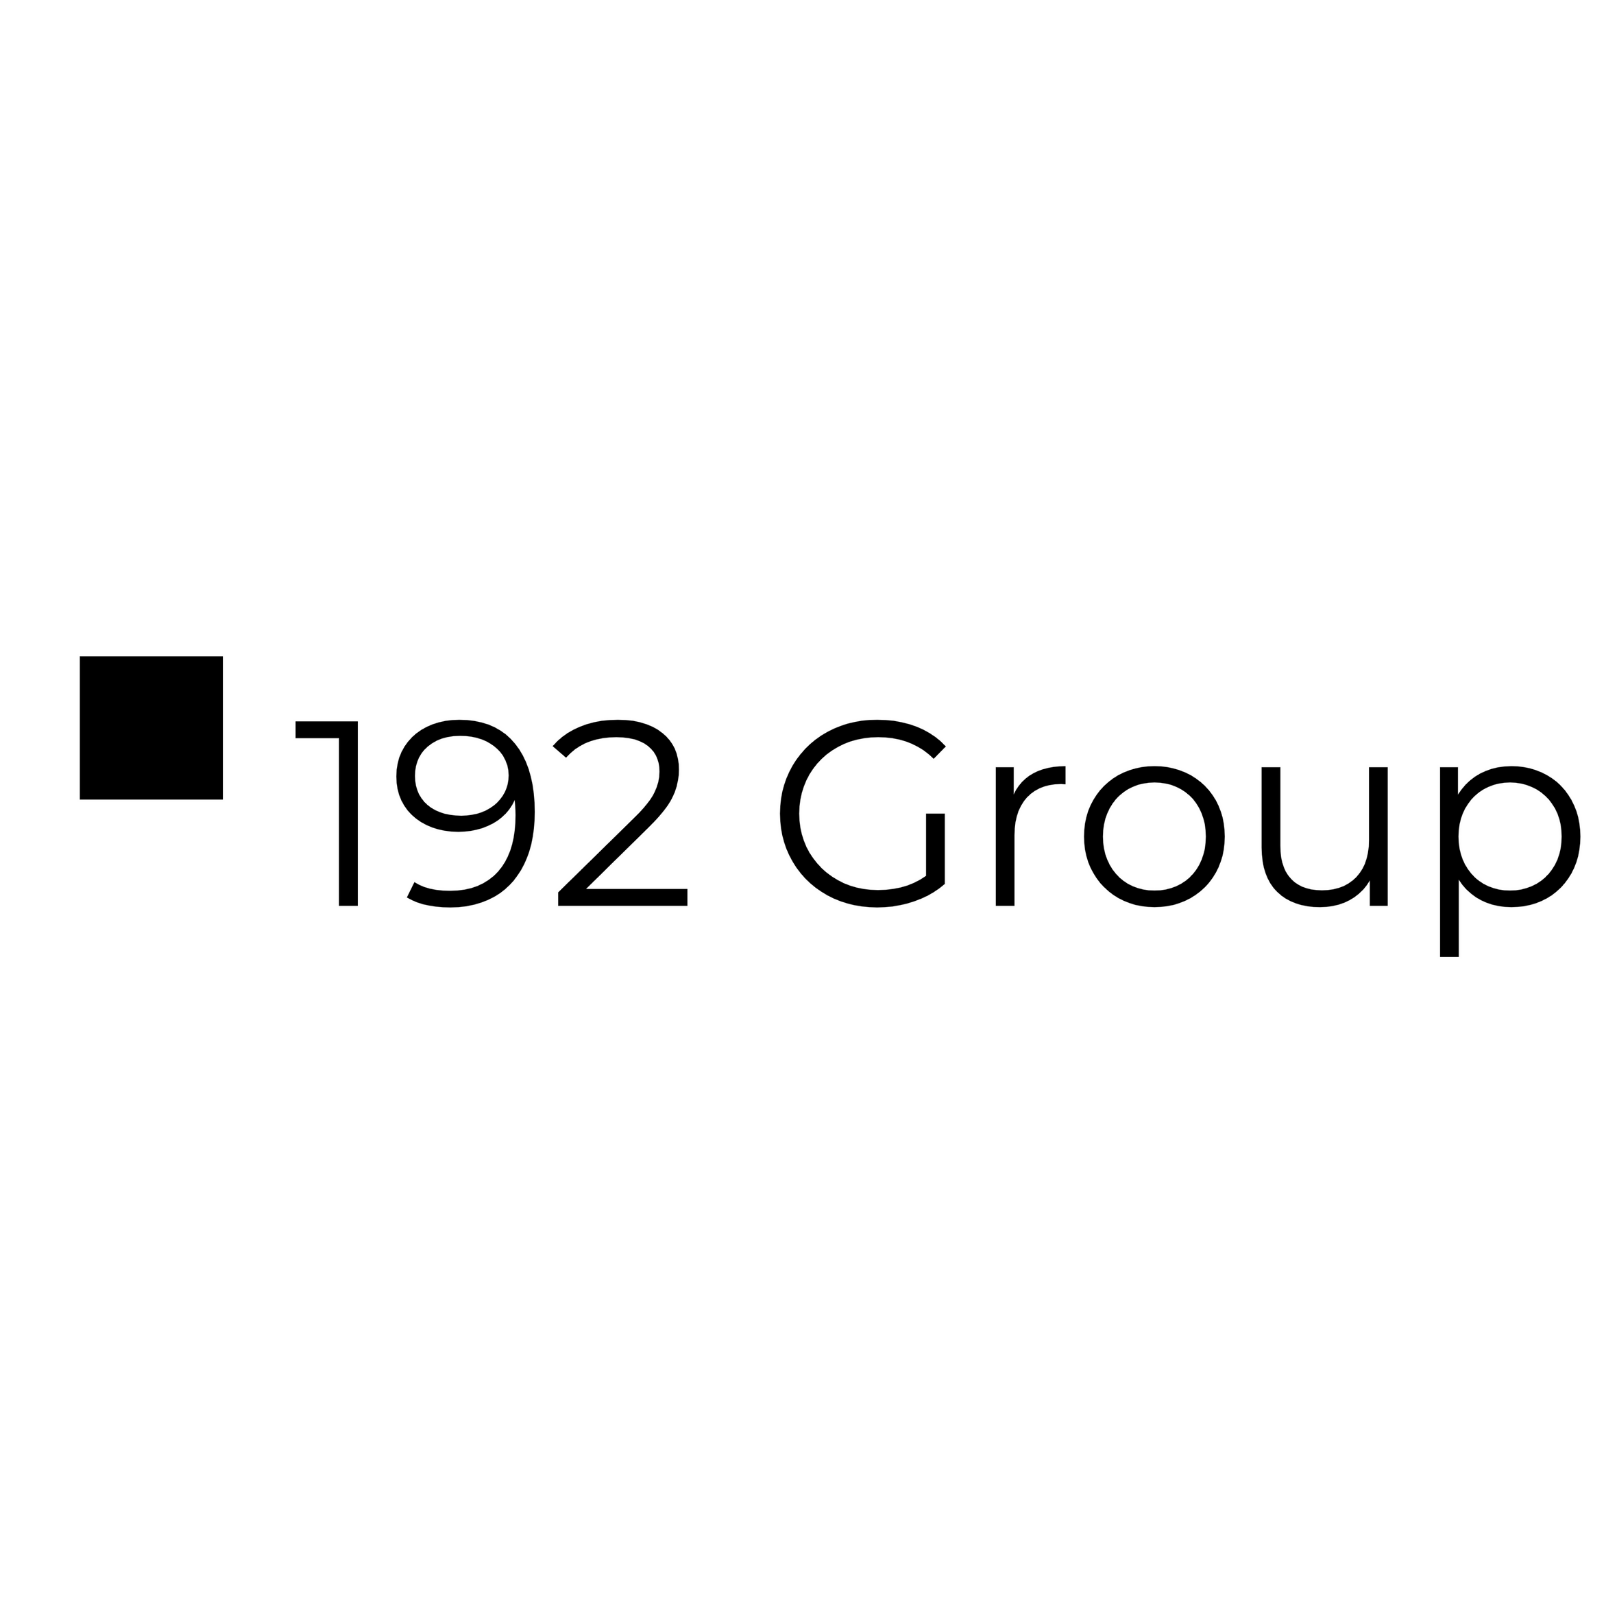 The 192 Group 